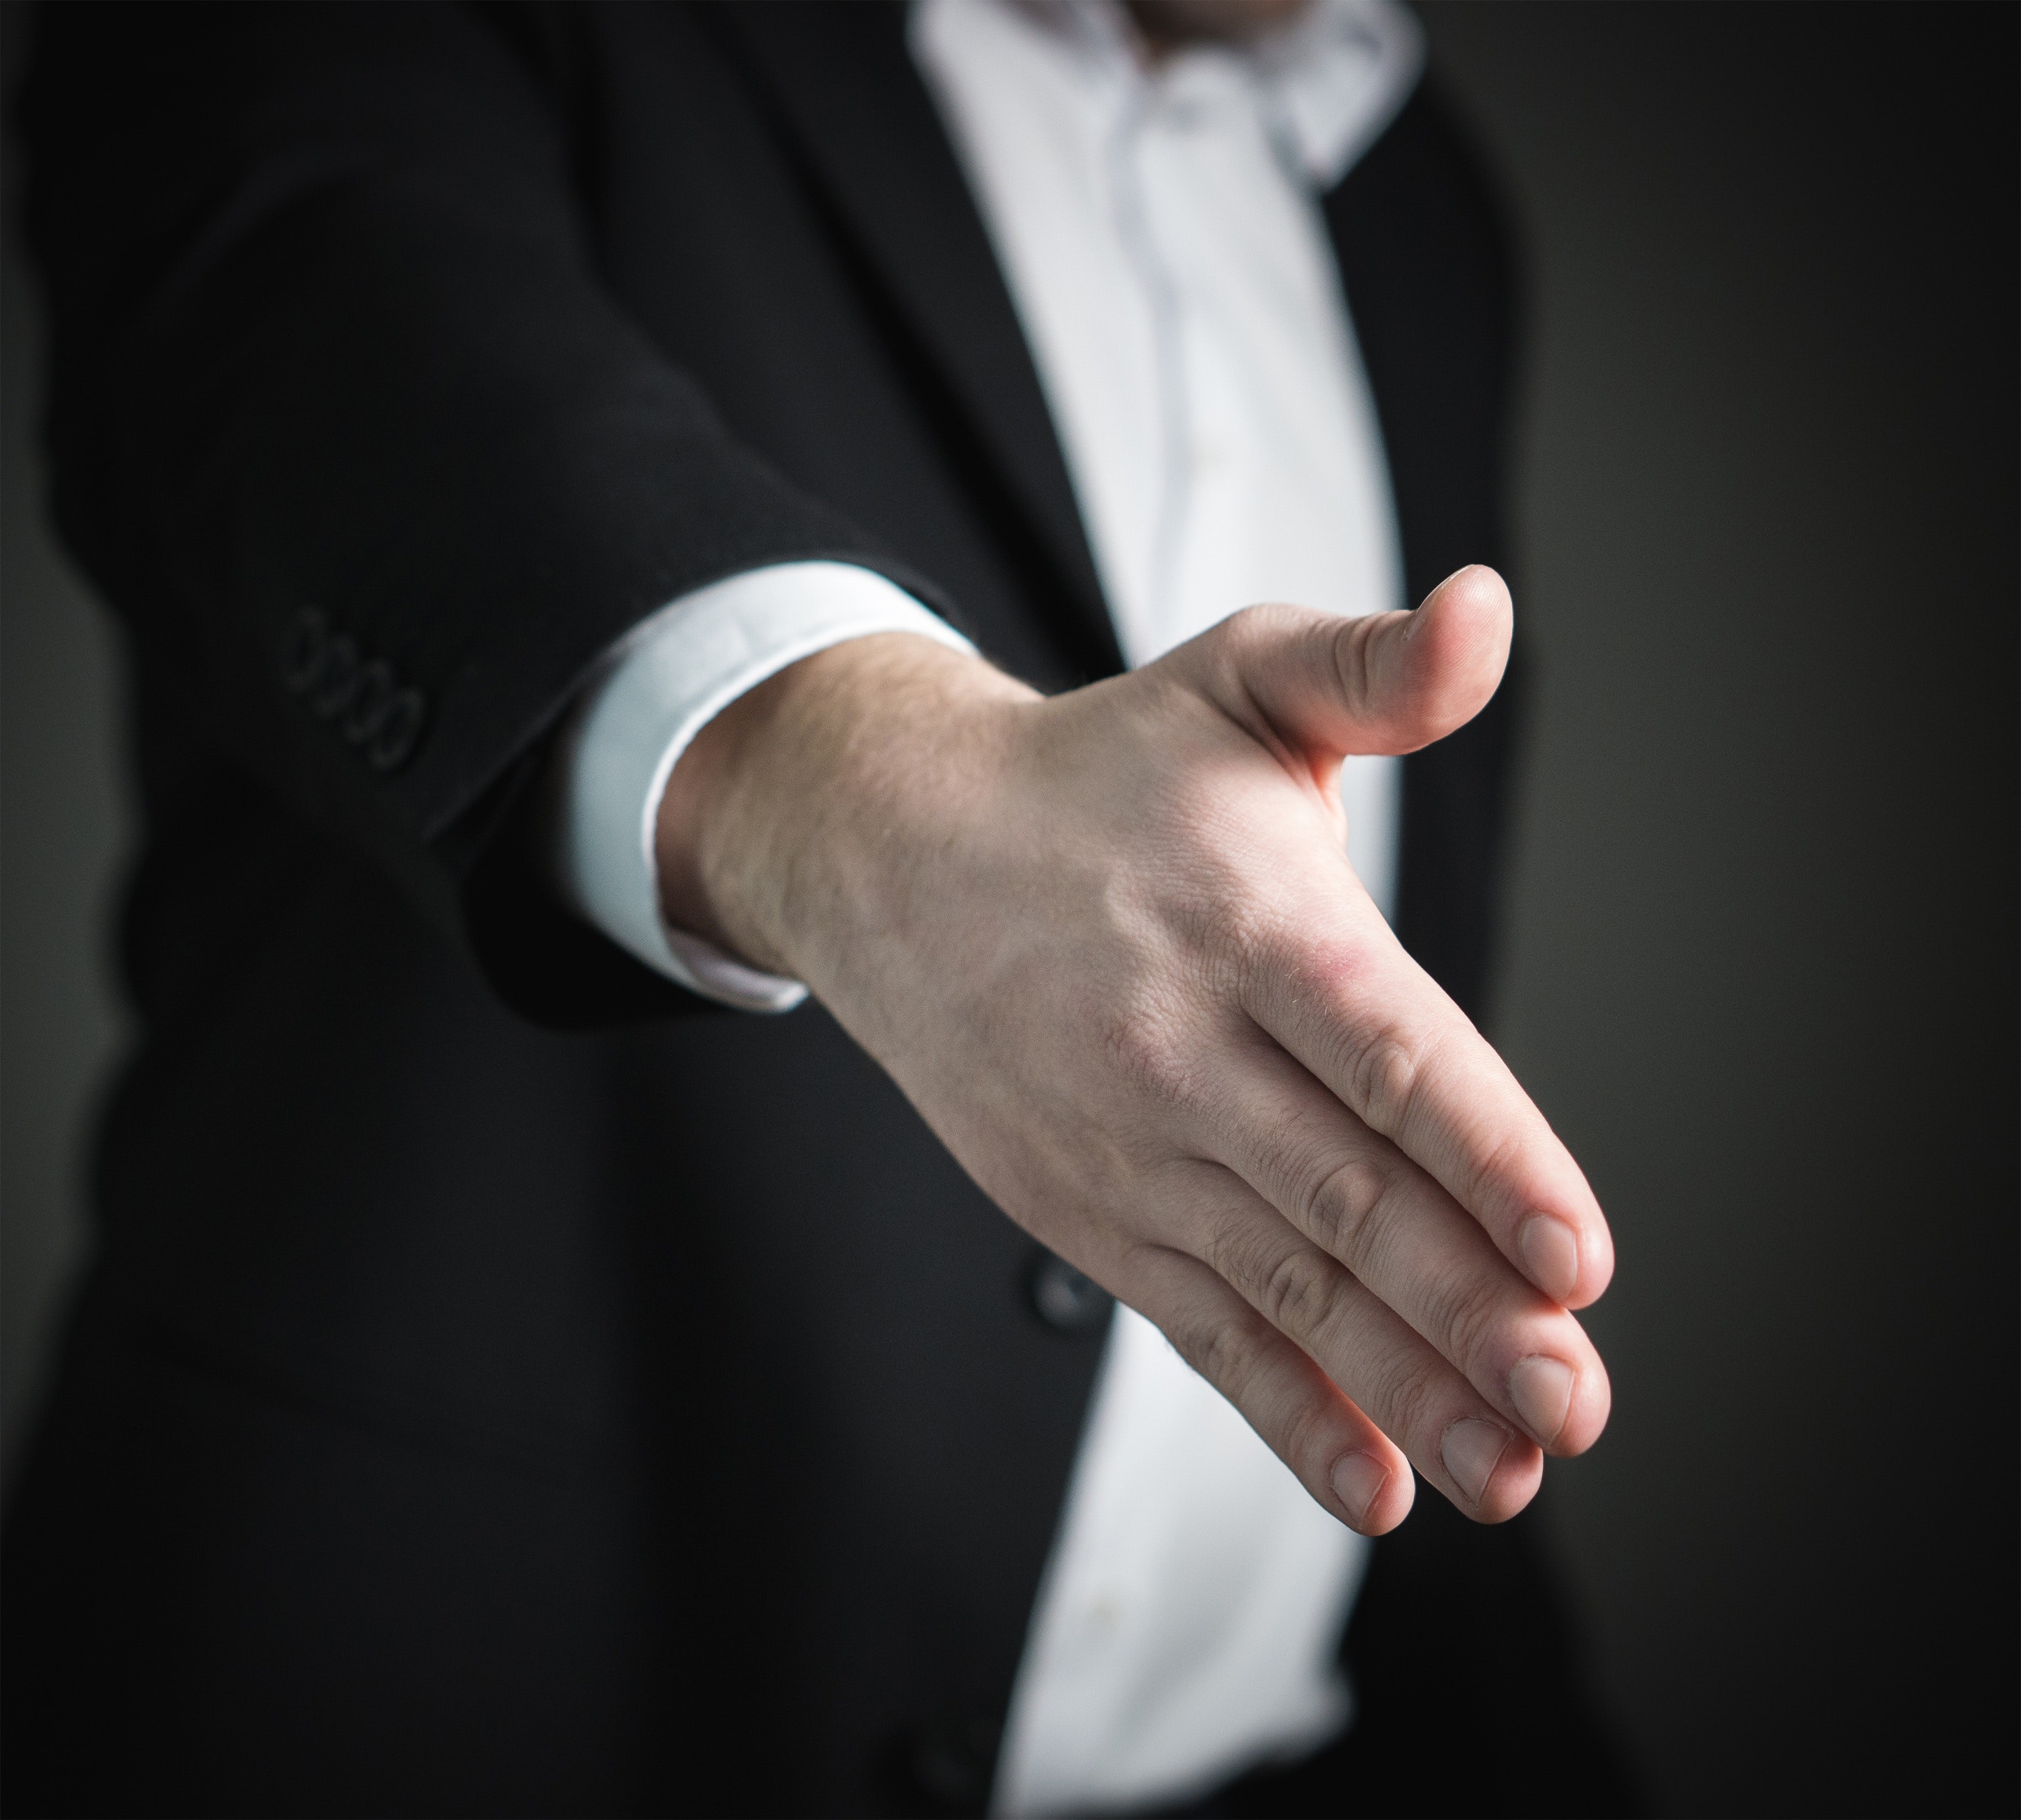 Close-up of Hand, Adult, Hand, Shake, Settlement, HQ Photo